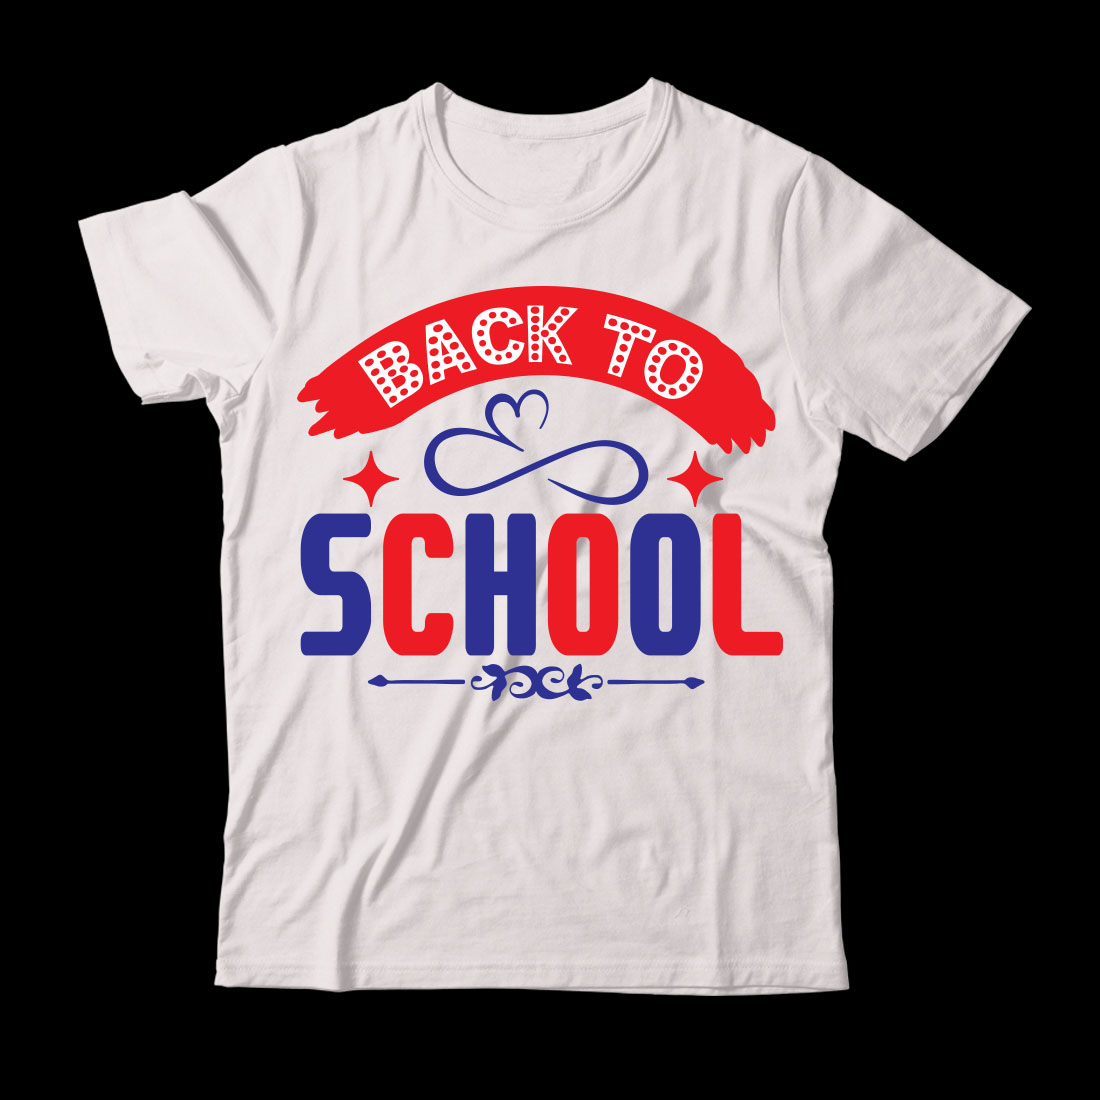 White t - shirt that says back to school.